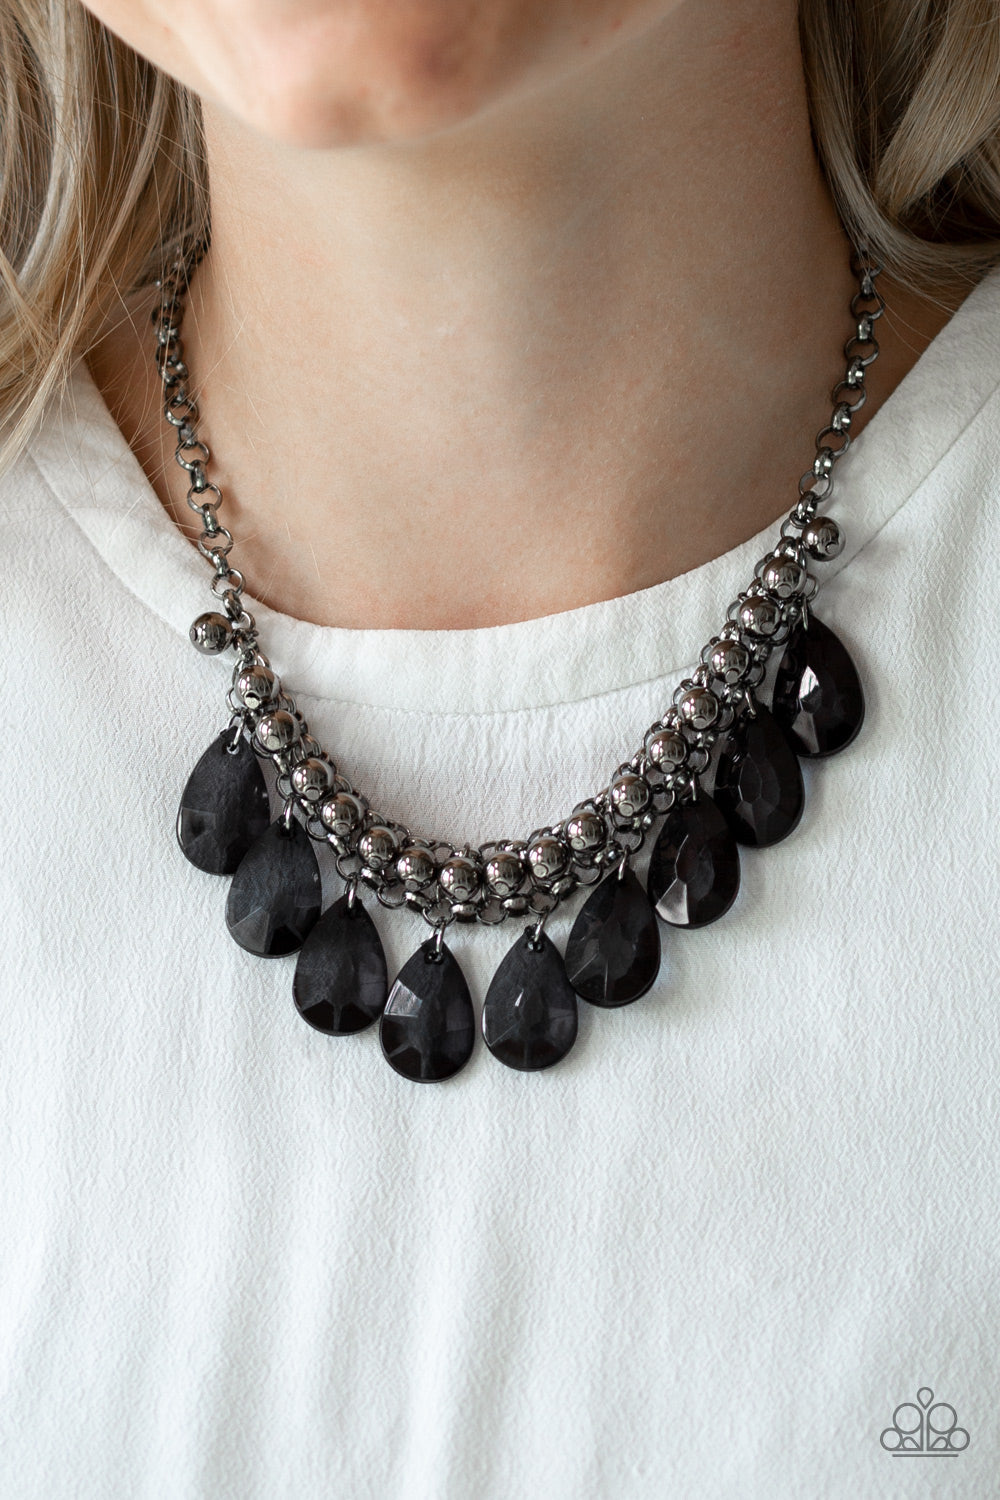 Fashionista Flair - Black and Gunmetal Necklace - Paparazzi Accessories - A row of glistening gunmetal beads gives way to glassy black teardrops, creating a bold tone on tone fringe below the collar. Features an adjustable clasp closure. Sold as one individual necklace.